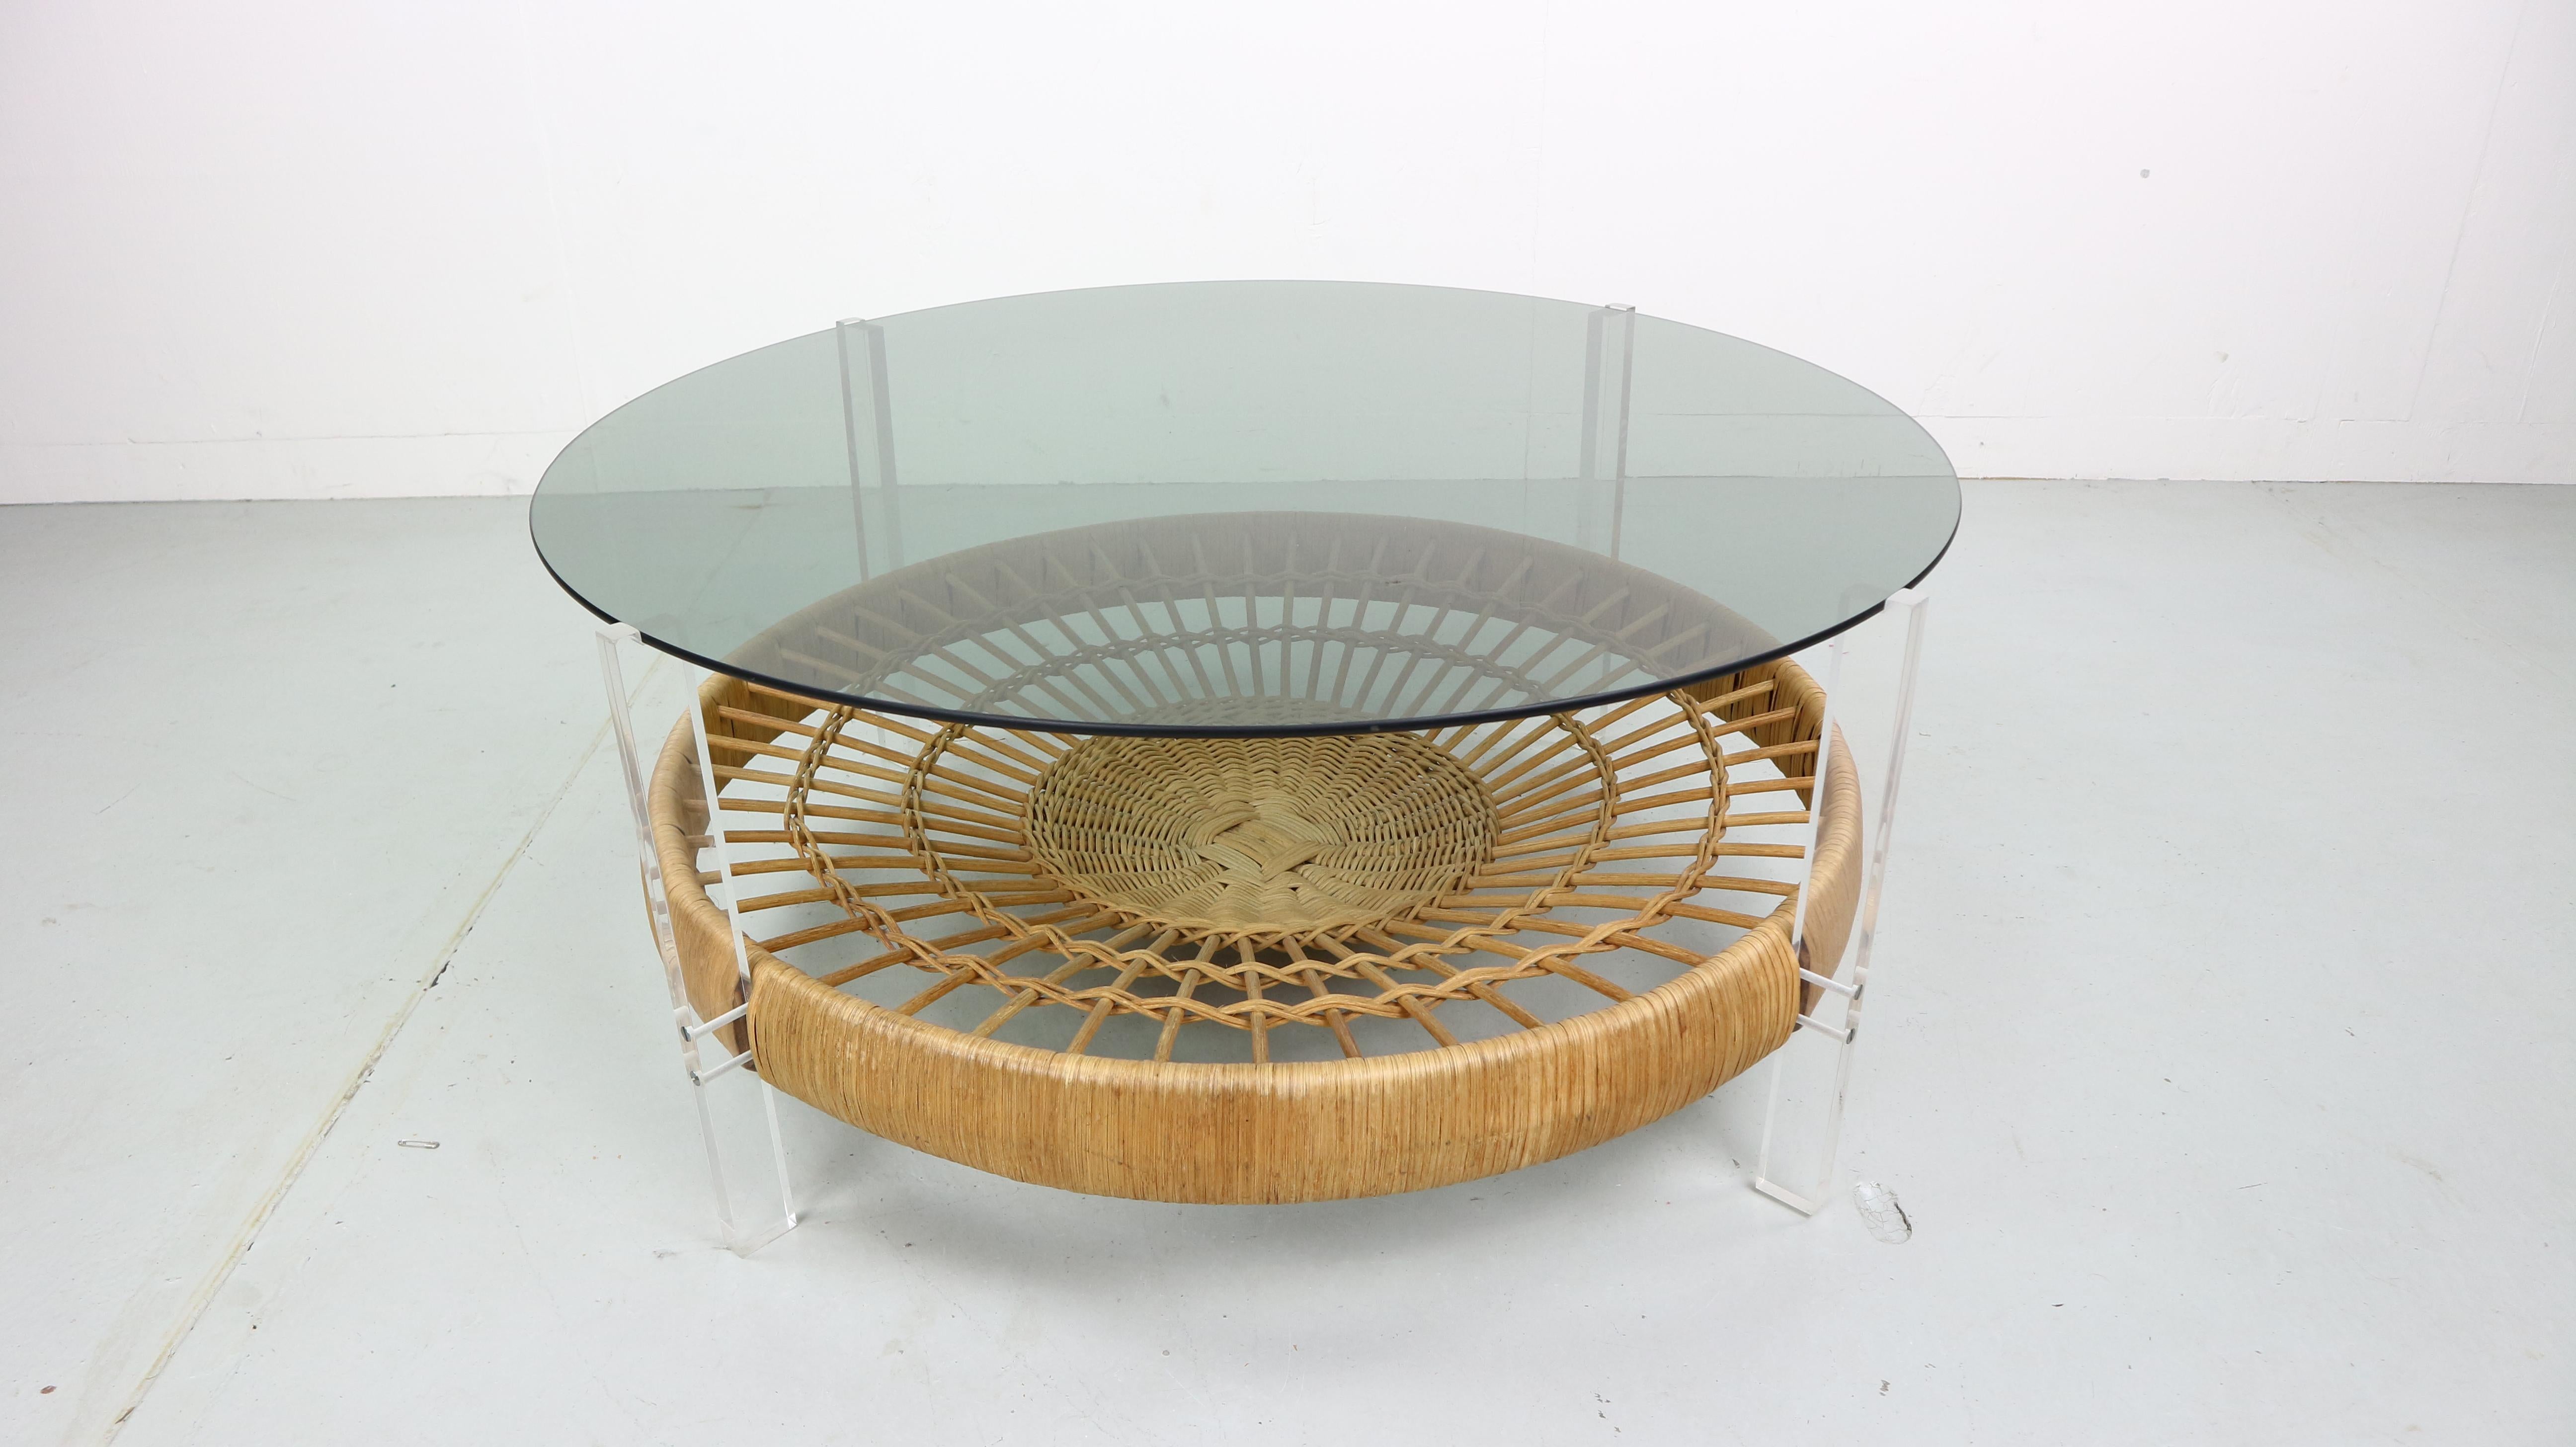 Rattan and glass coffee table from the 1970s, Italy.
This table has great round form, contracting materials work in harmony to create a real showcase piece that would compliment any mid century interior. It features a Lucite frame with a smoked